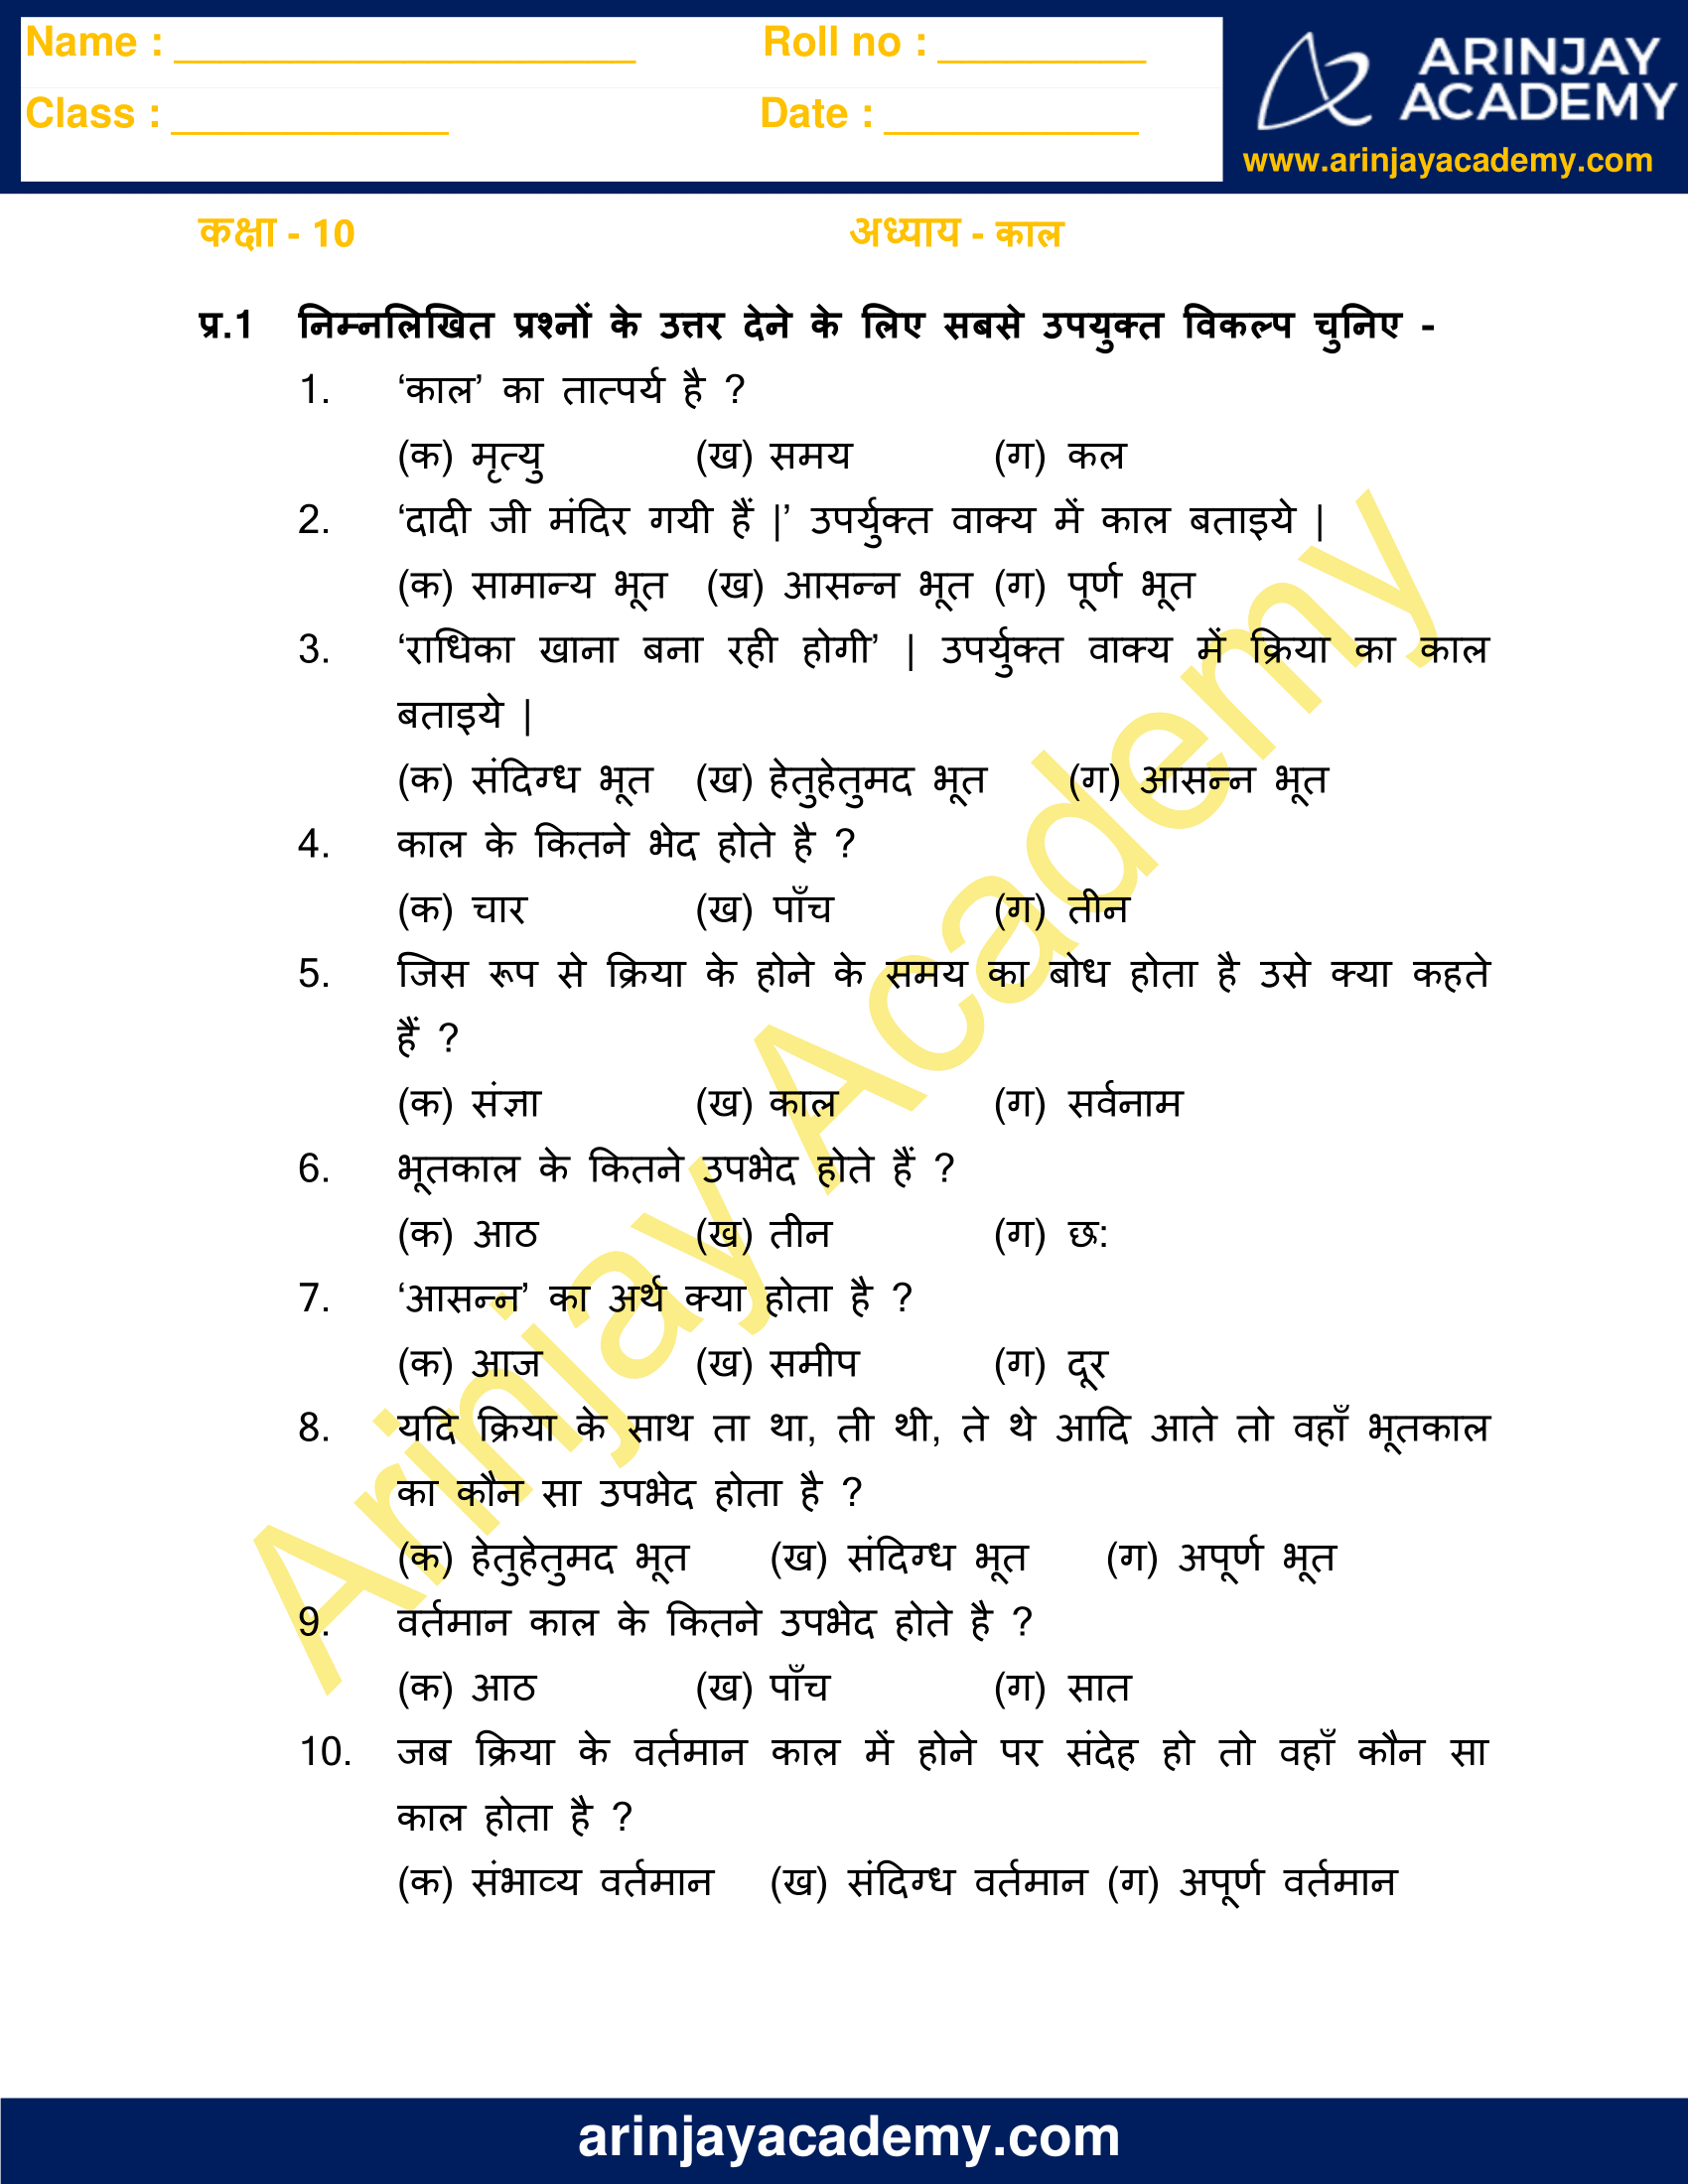 kaal-worksheet-in-hindi-for-class-10-free-and-printable-worksheets